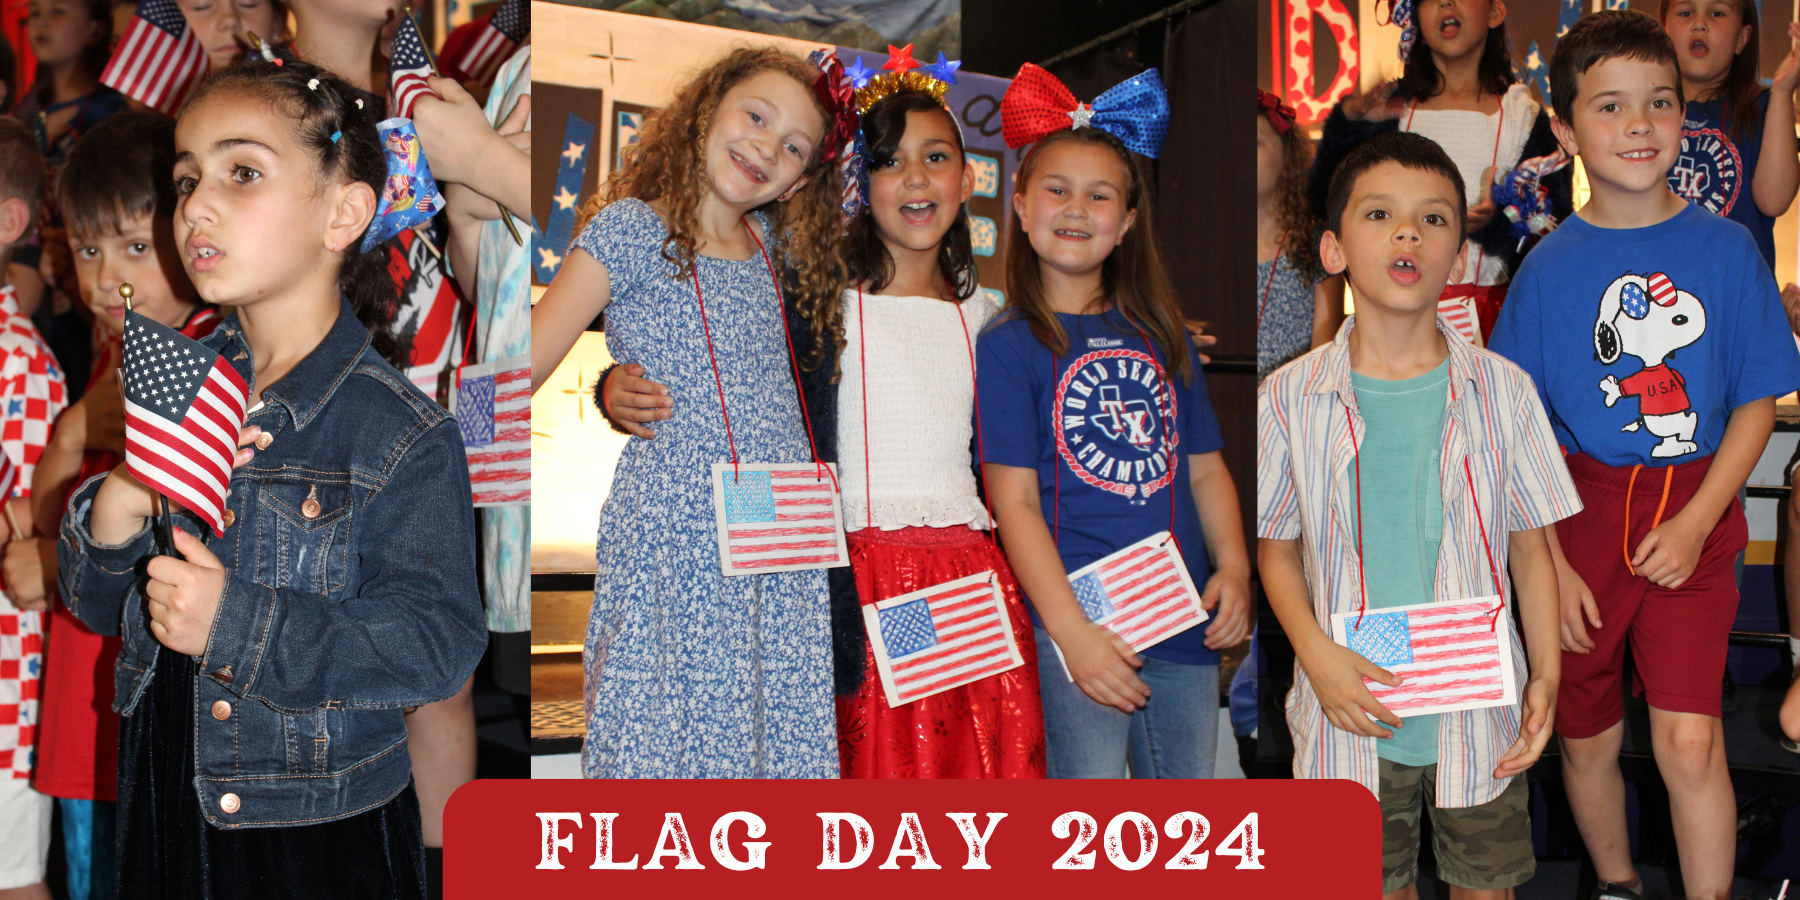 YOUNG STUDENTS WAVE AMERICAN FLAGS